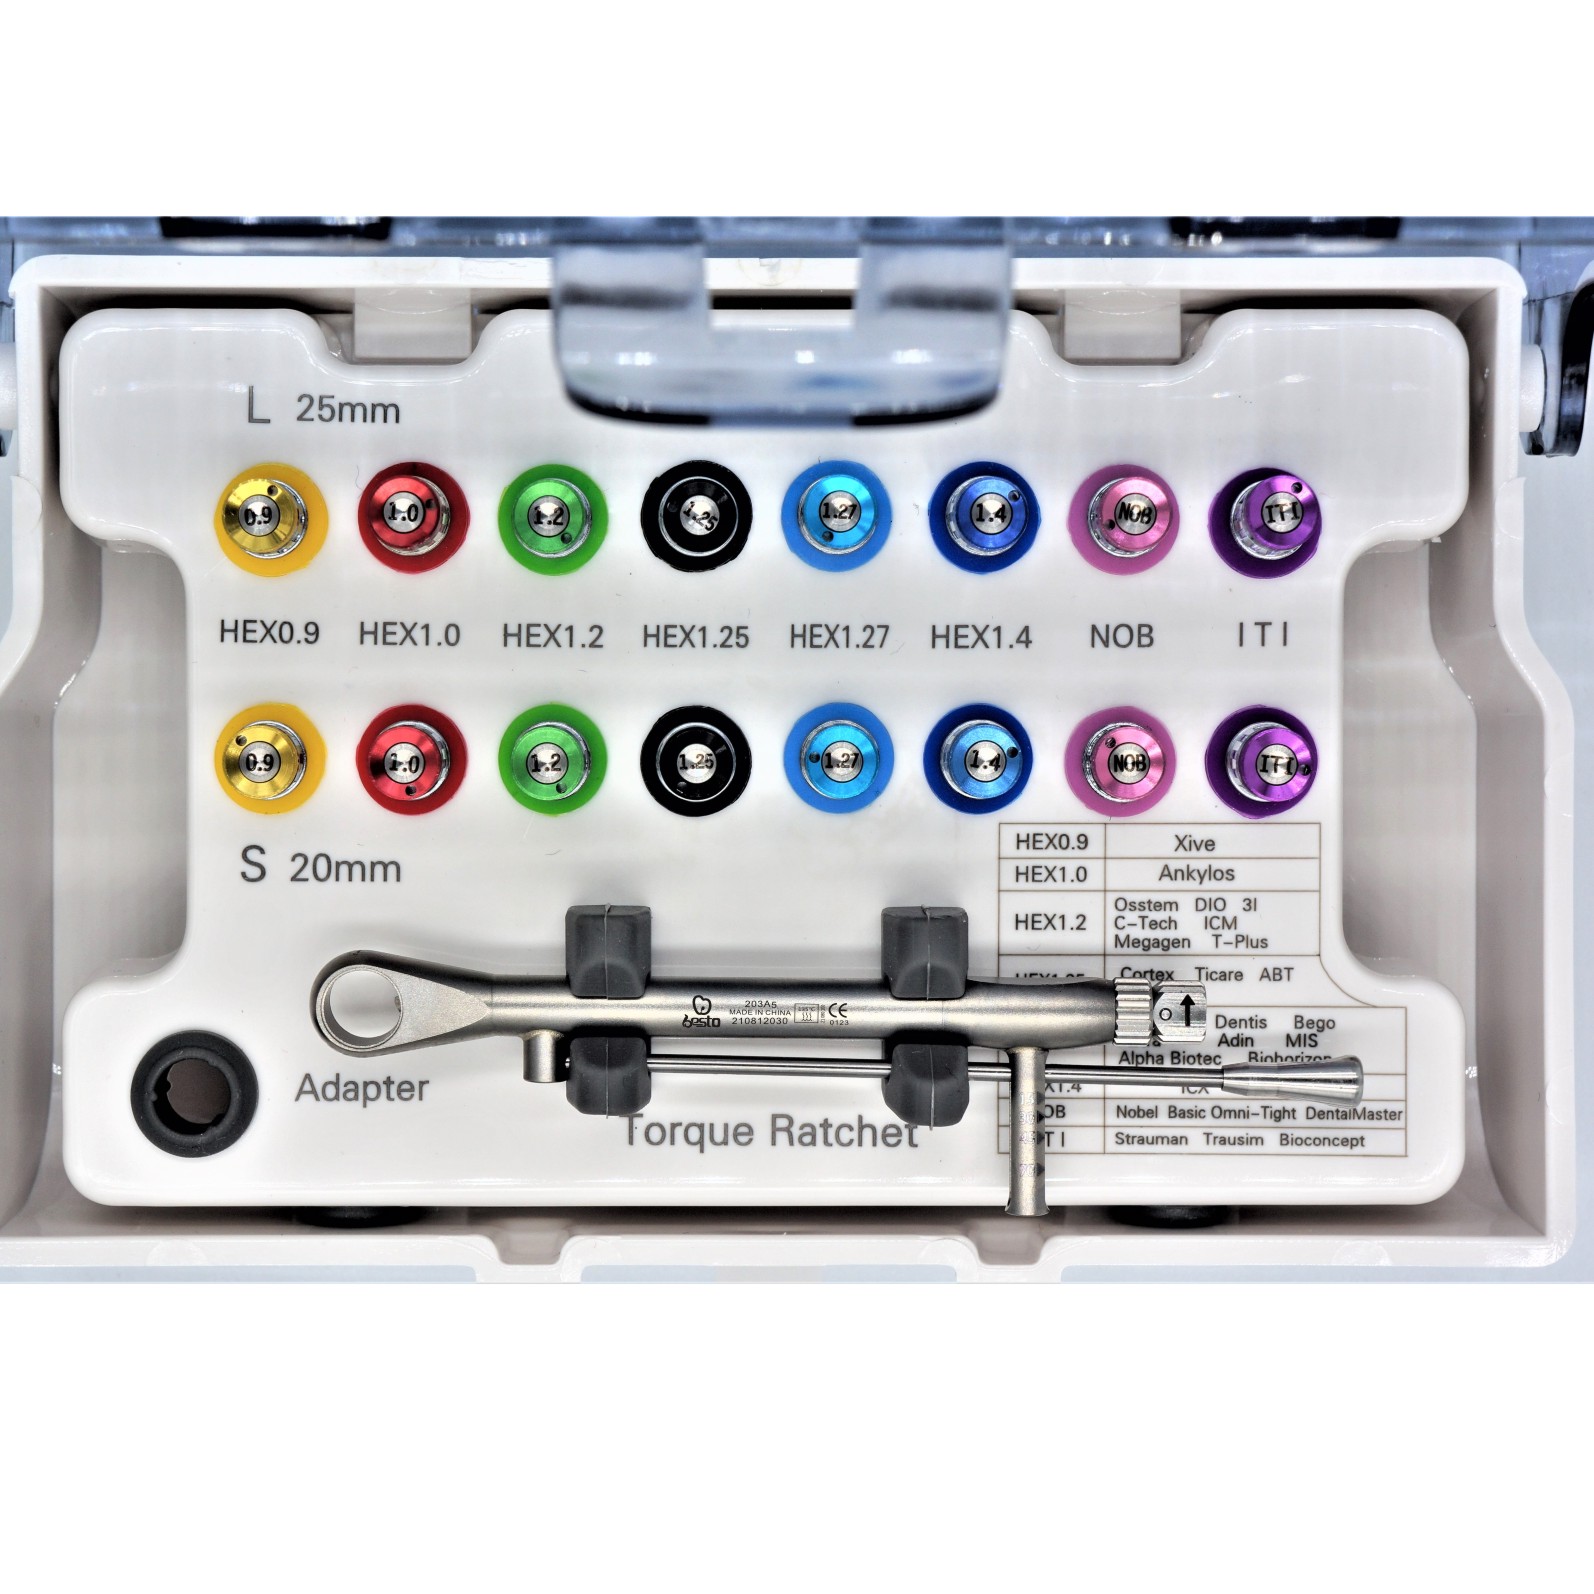  Dental Universal Implant Torque Screwdrivers Wrench Tool Kit For Dental Treatment.